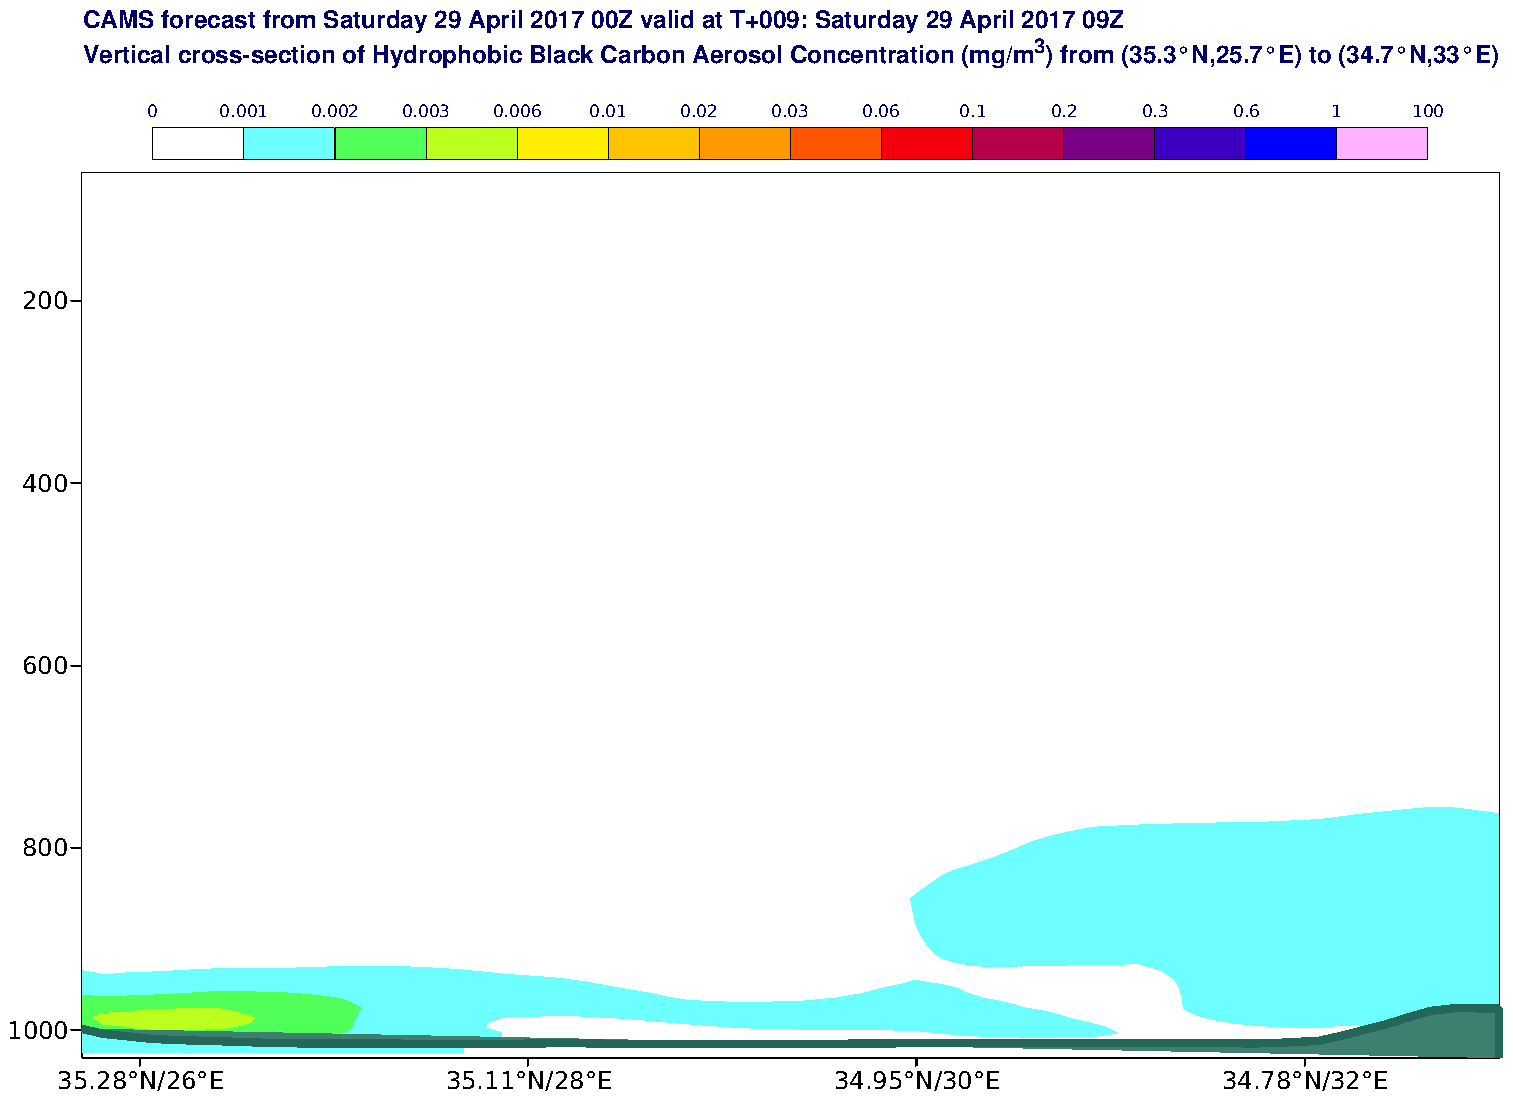 Vertical cross-section of Hydrophobic Black Carbon Aerosol Concentration (mg/m3) valid at T9 - 2017-04-29 09:00